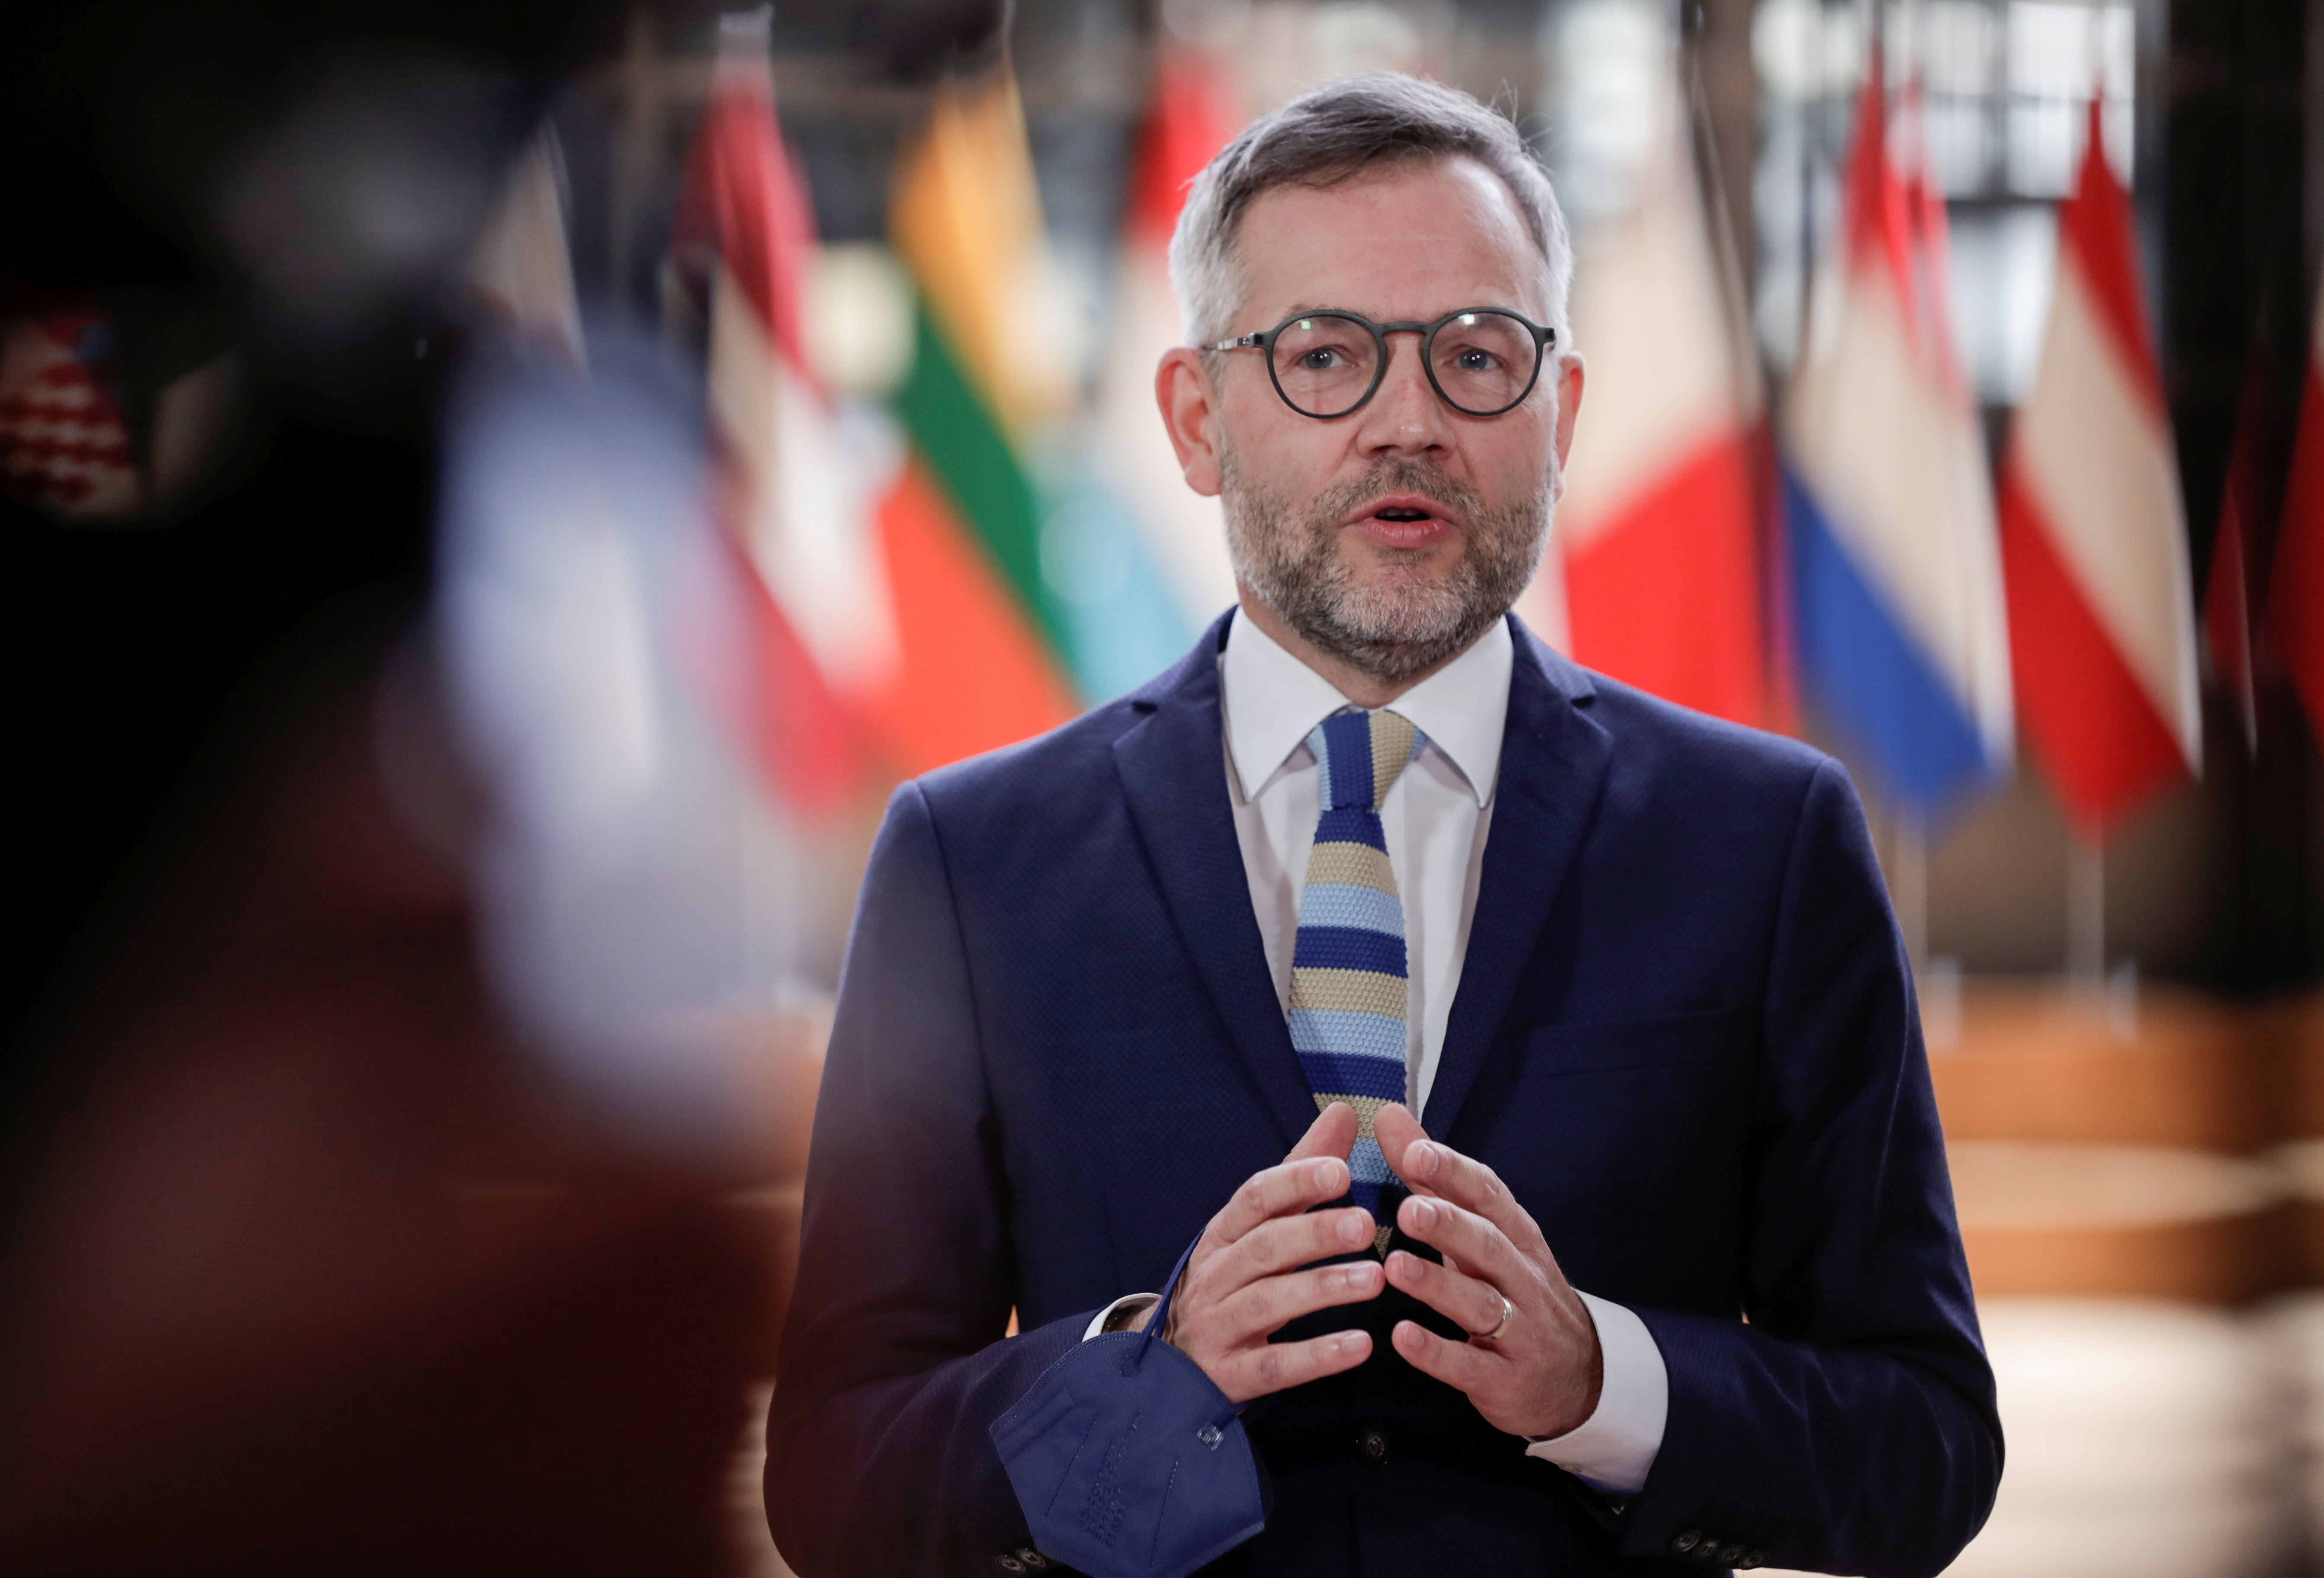 German Minister of State for Europe, Michael Roth gestures as he speaks at the start of the European affairs ministers meeting in Brussels, Belgium, May 11, 2021. Olivier Hoslet/Pool via REUTERS